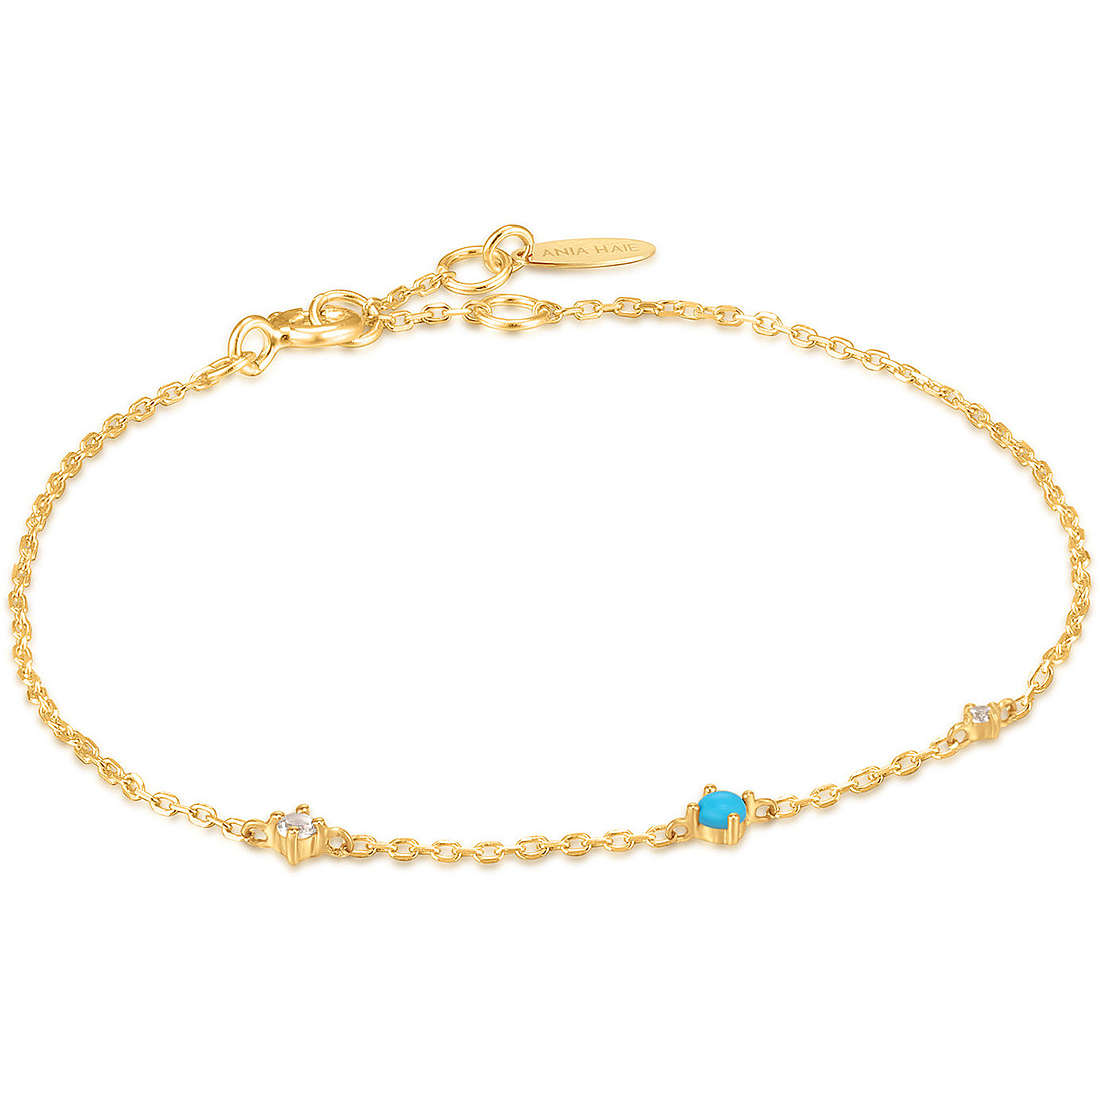 Ania Haie Gold Collection bracelet woman Bracelet with 14kt Gold Chain jewel BAU001-02YG